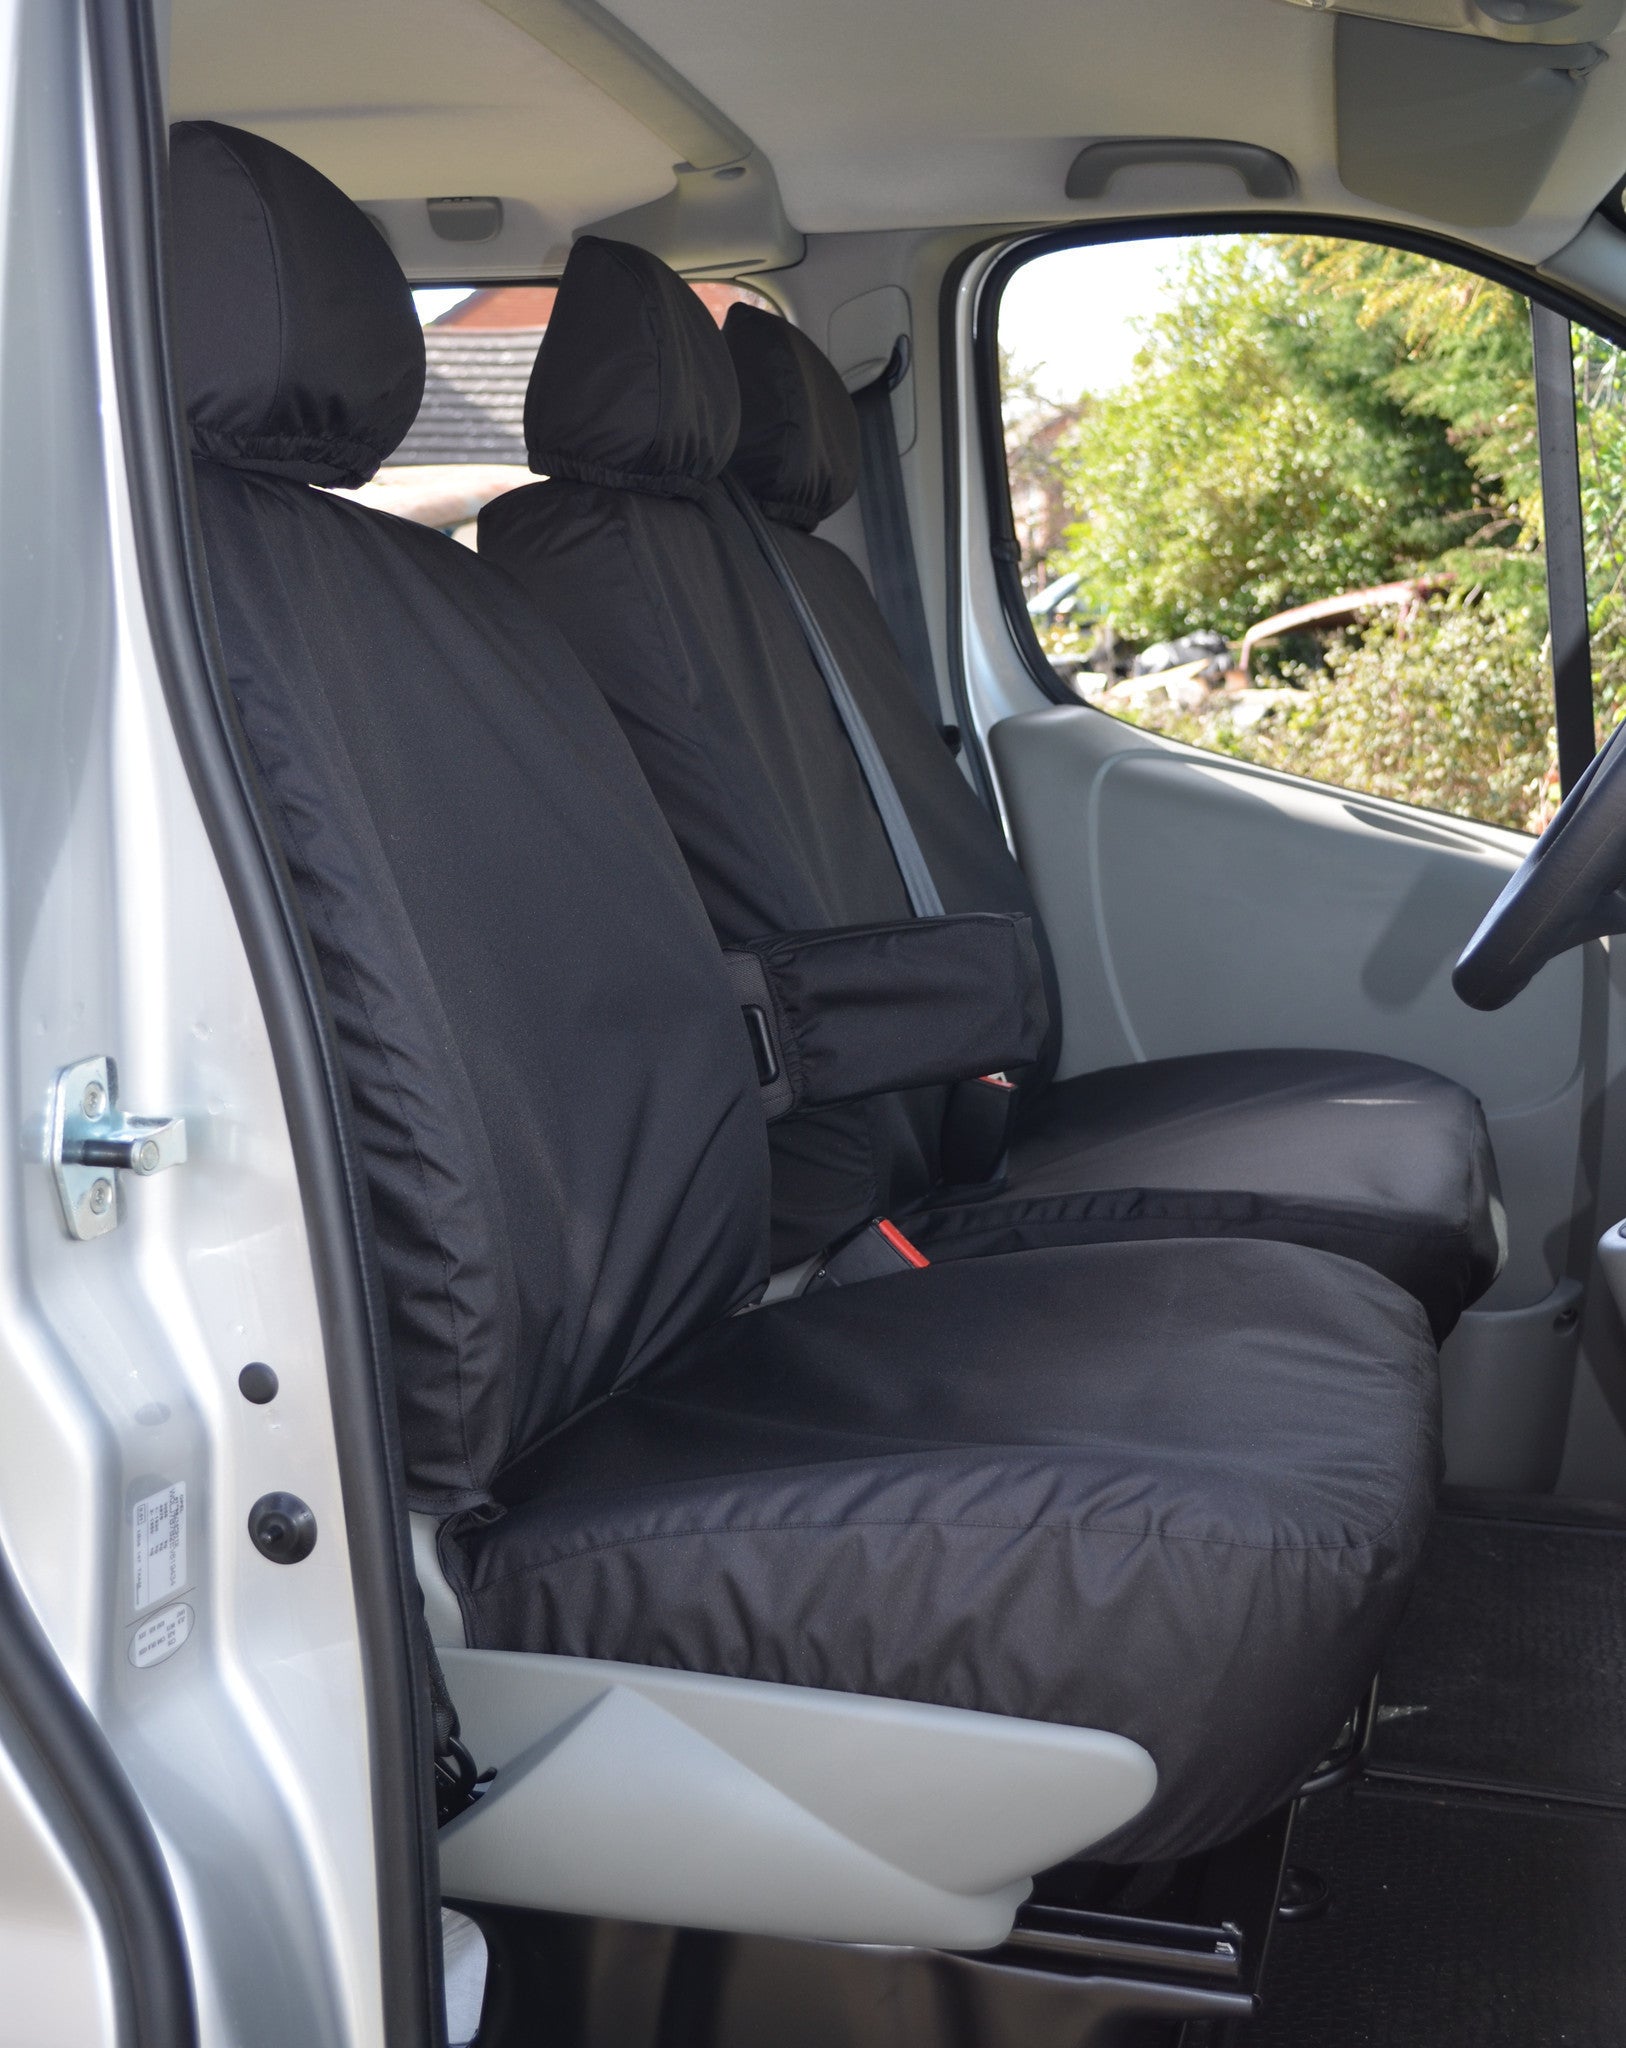 Nissan Primastar 2006 - 2014 Tailored Front Seat Covers Black / With Driver's Armrest Turtle Covers Ltd